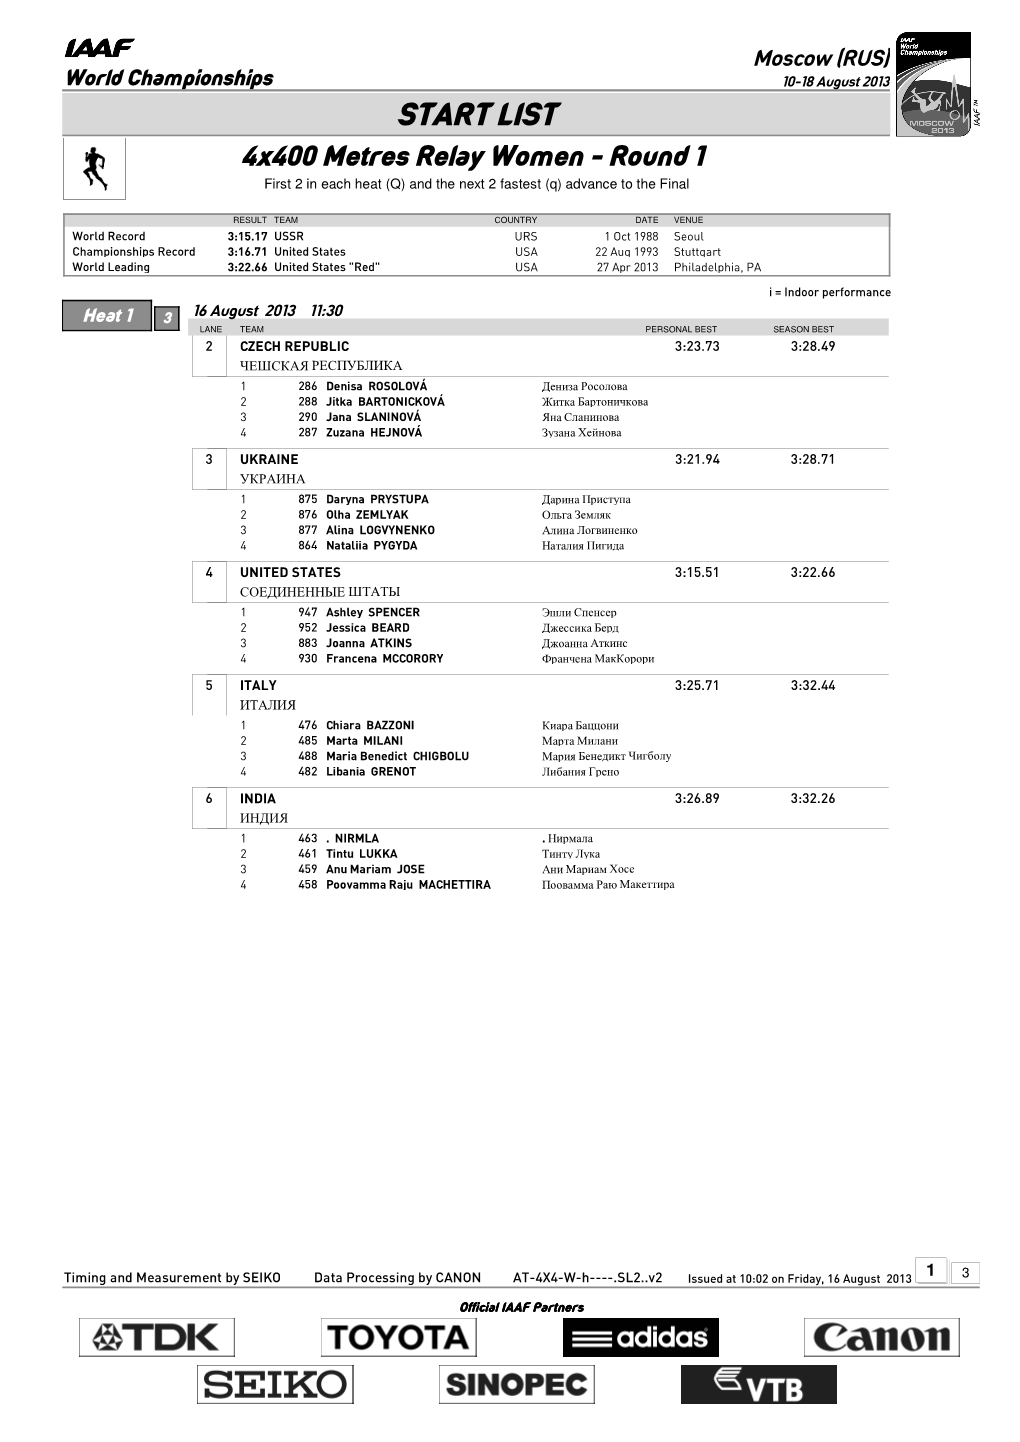 START LIST 4X400 Metres Relay Women - Round 1 First 2 in Each Heat (Q) and the Next 2 Fastest (Q) Advance to the Final